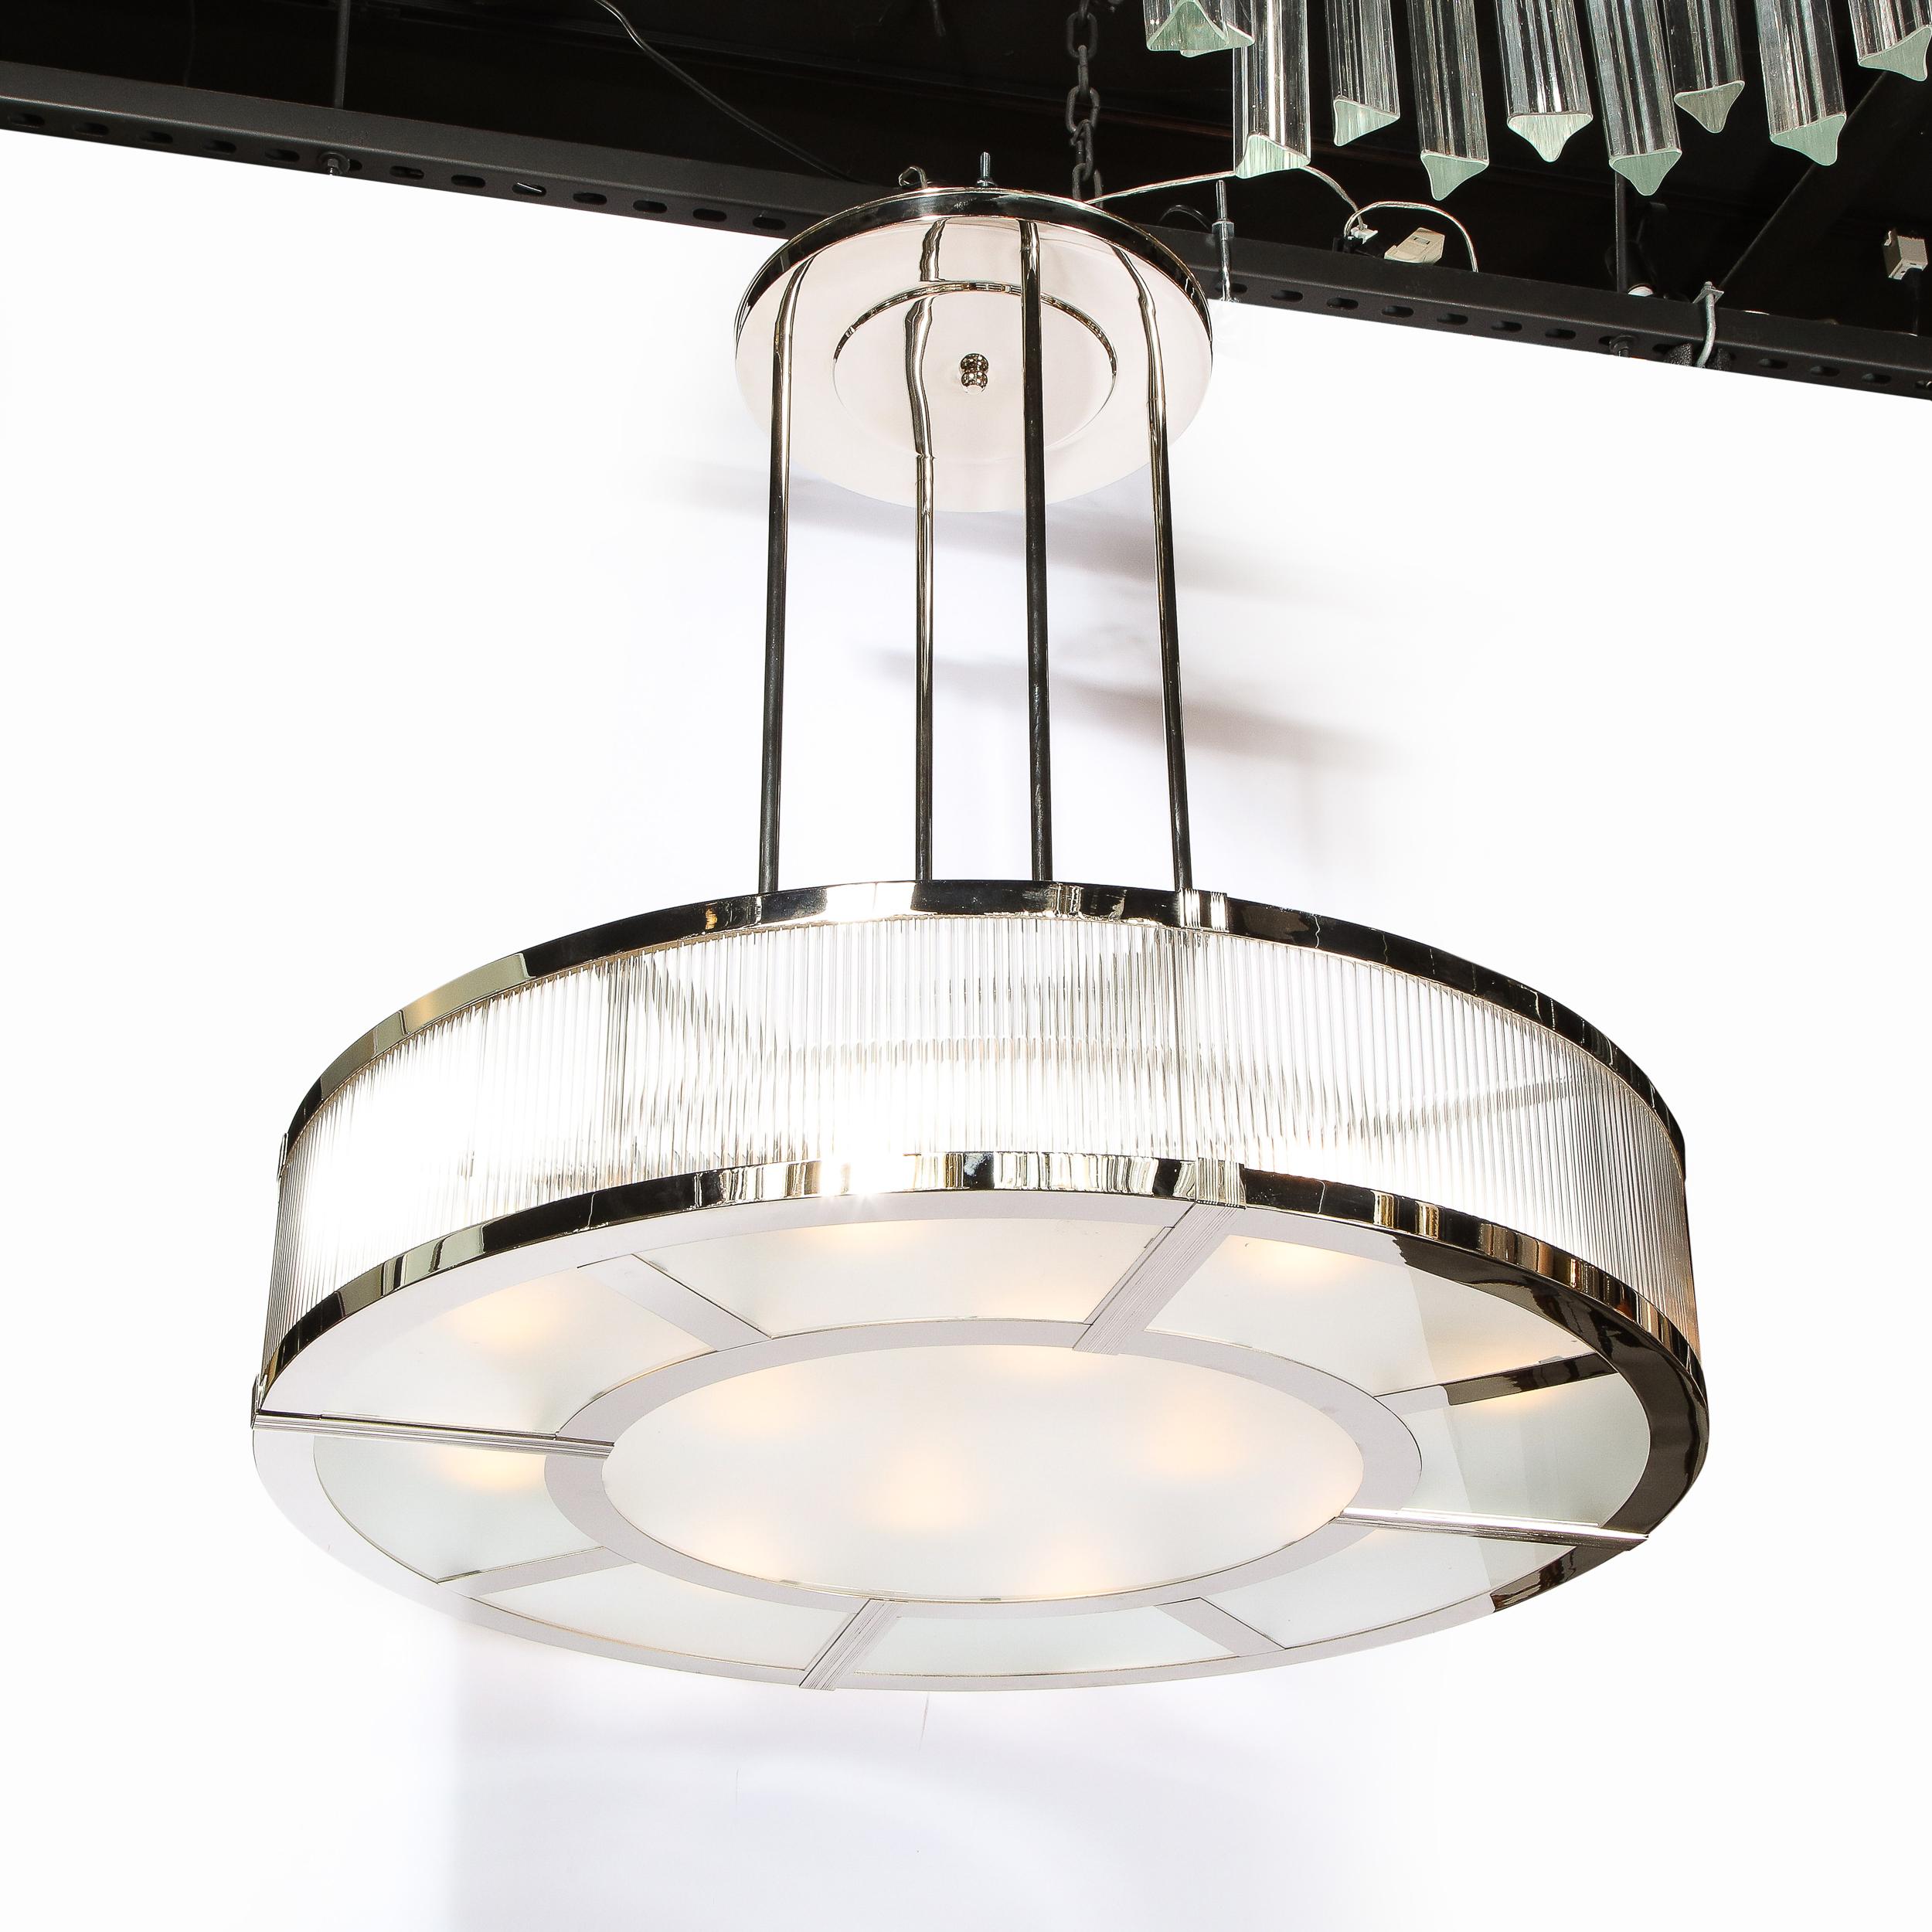 This large scale Machine Age French Art Deco style chandelier, in the manner of Petitot, features an abundance of vertically oriented glass rods supported by nickeled bronze fittings. On the bottom of the fixture frosted glass panels- a circular one